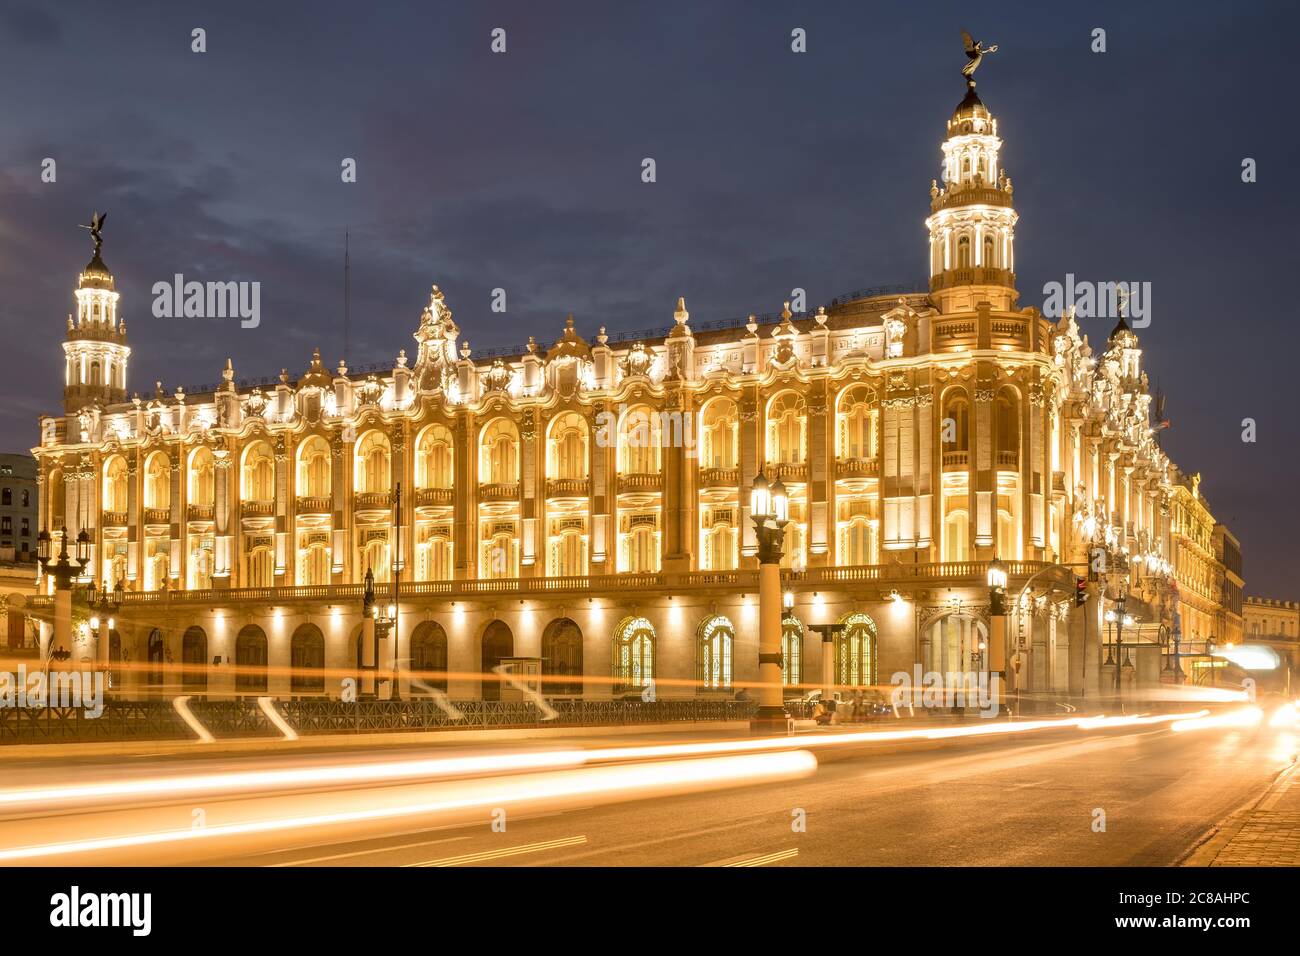 The Great Theater of Havana, home of the Cuban National Ballet, illuminated at night with traffic light trails Stock Photo